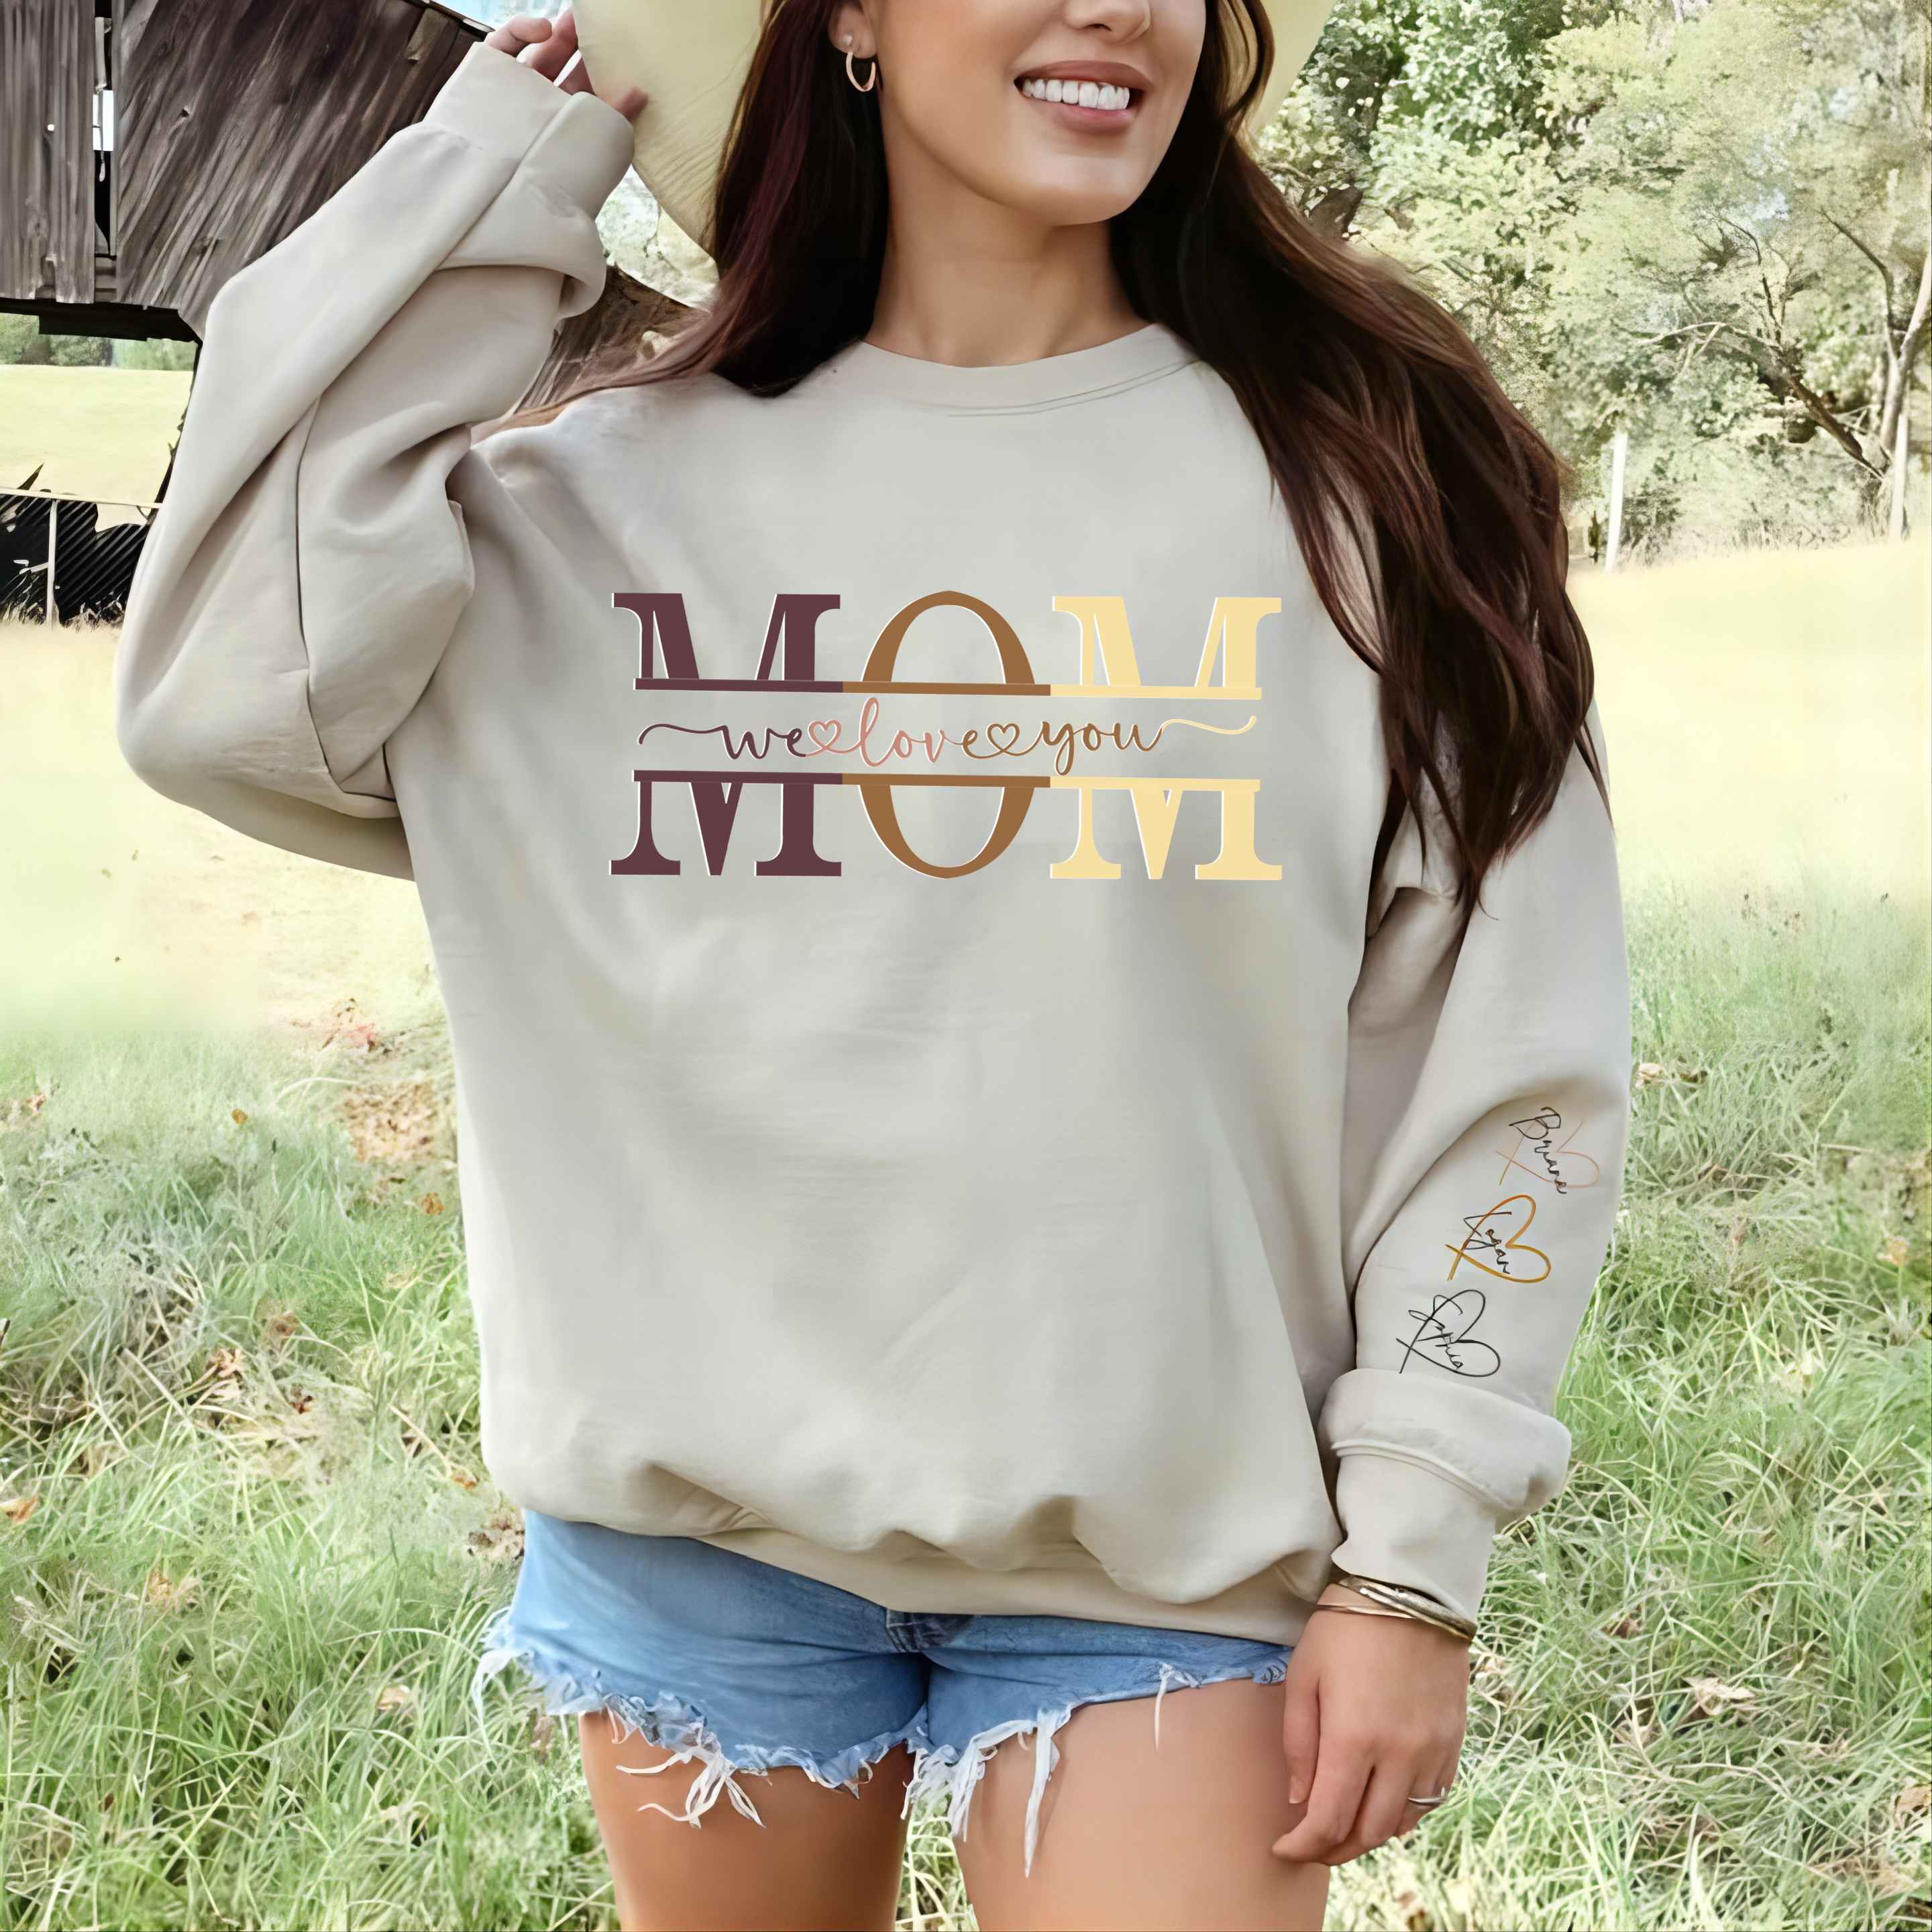 Personalized Wear Heart On Sleeve Mama we love you Sweatshirt with Kid Names on Sleeves-Mother's Day Sale (Customized free)